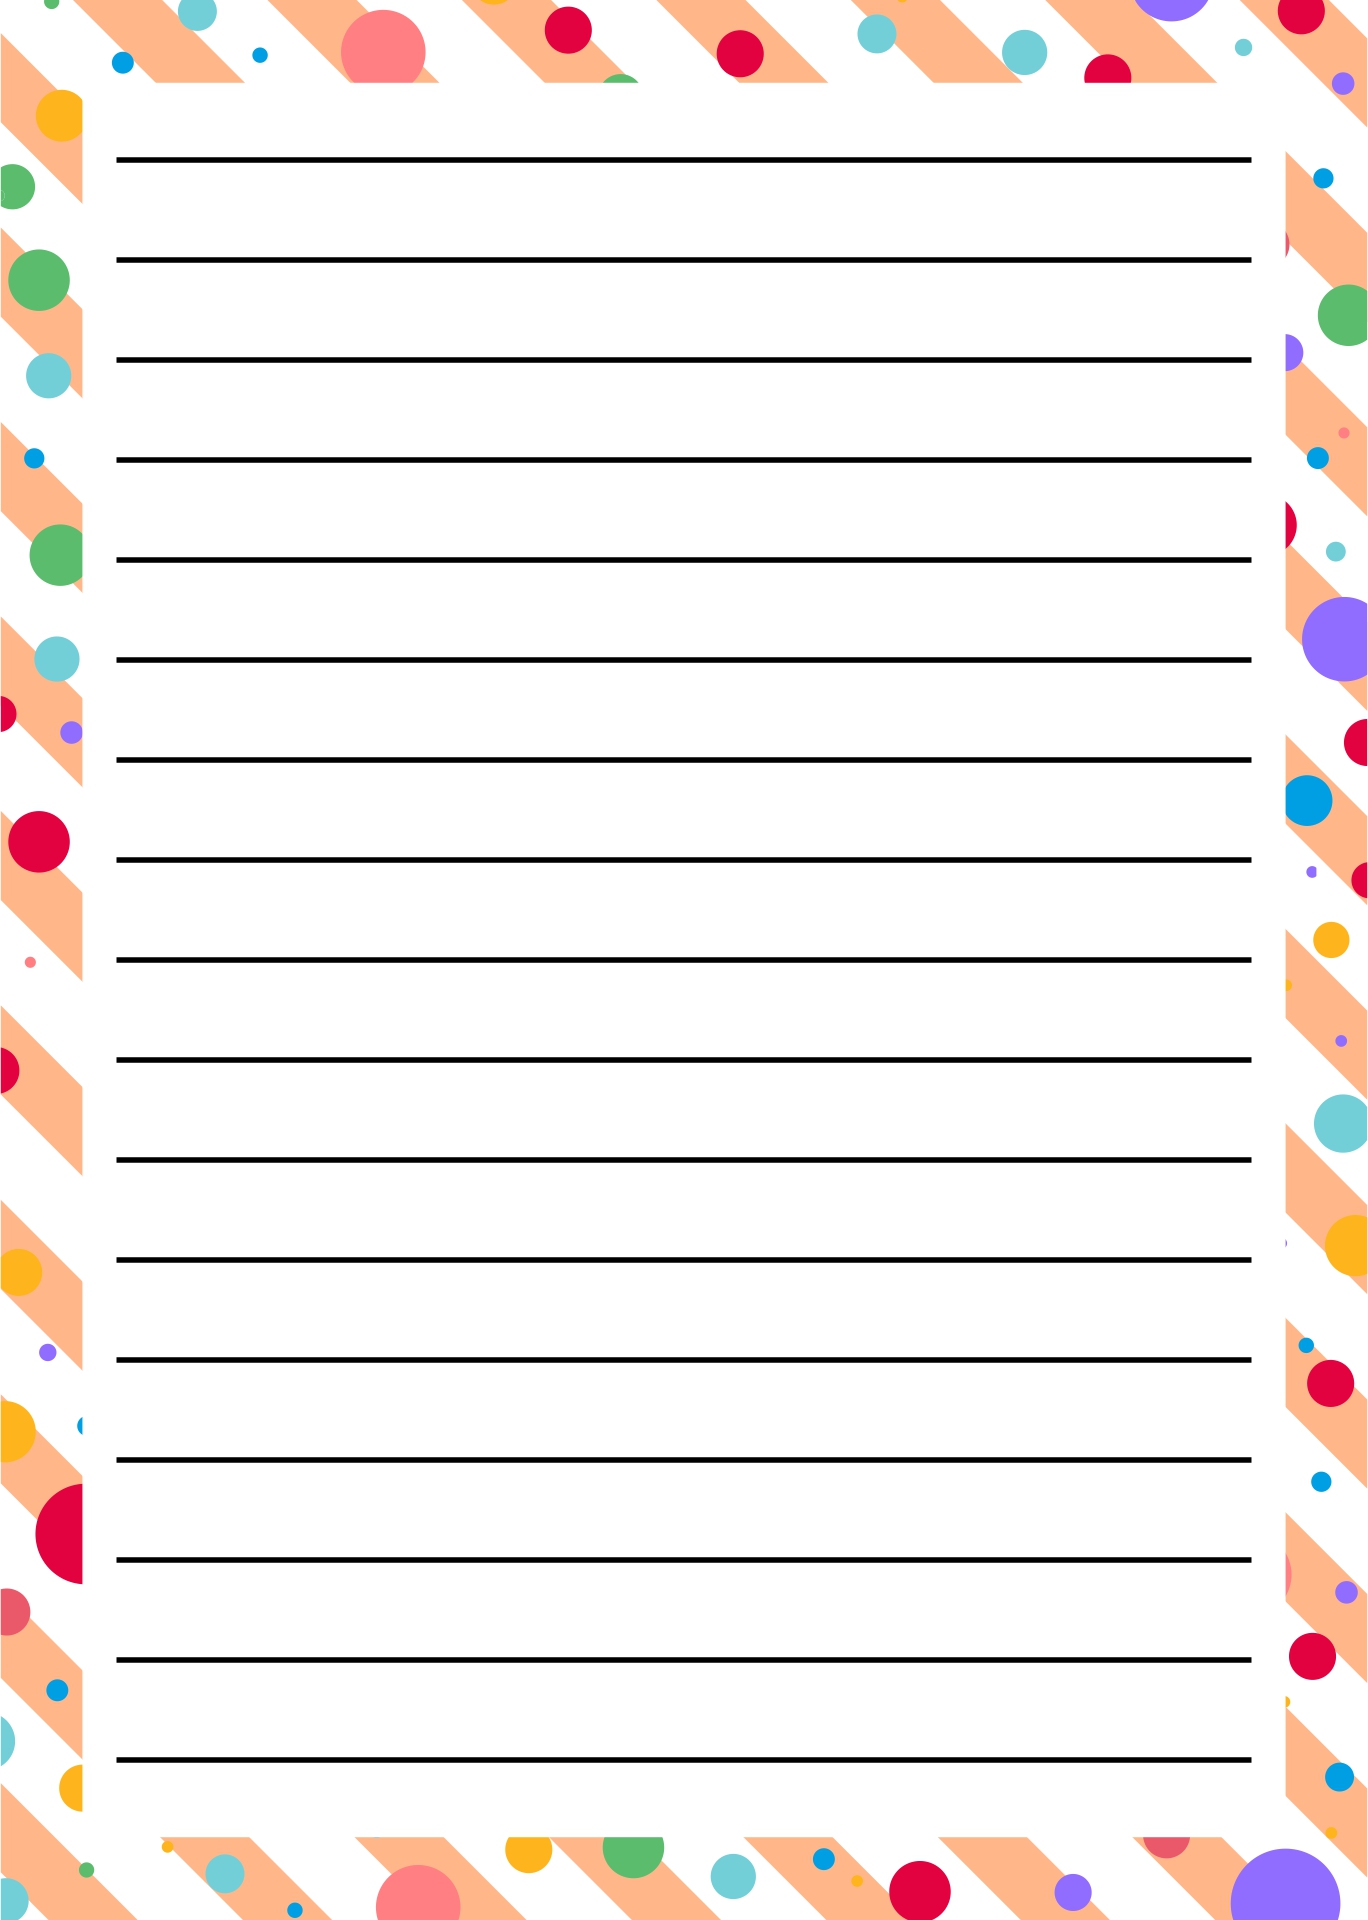 download-printable-lined-paper-template-wide-ruled-8-7mm-pdf